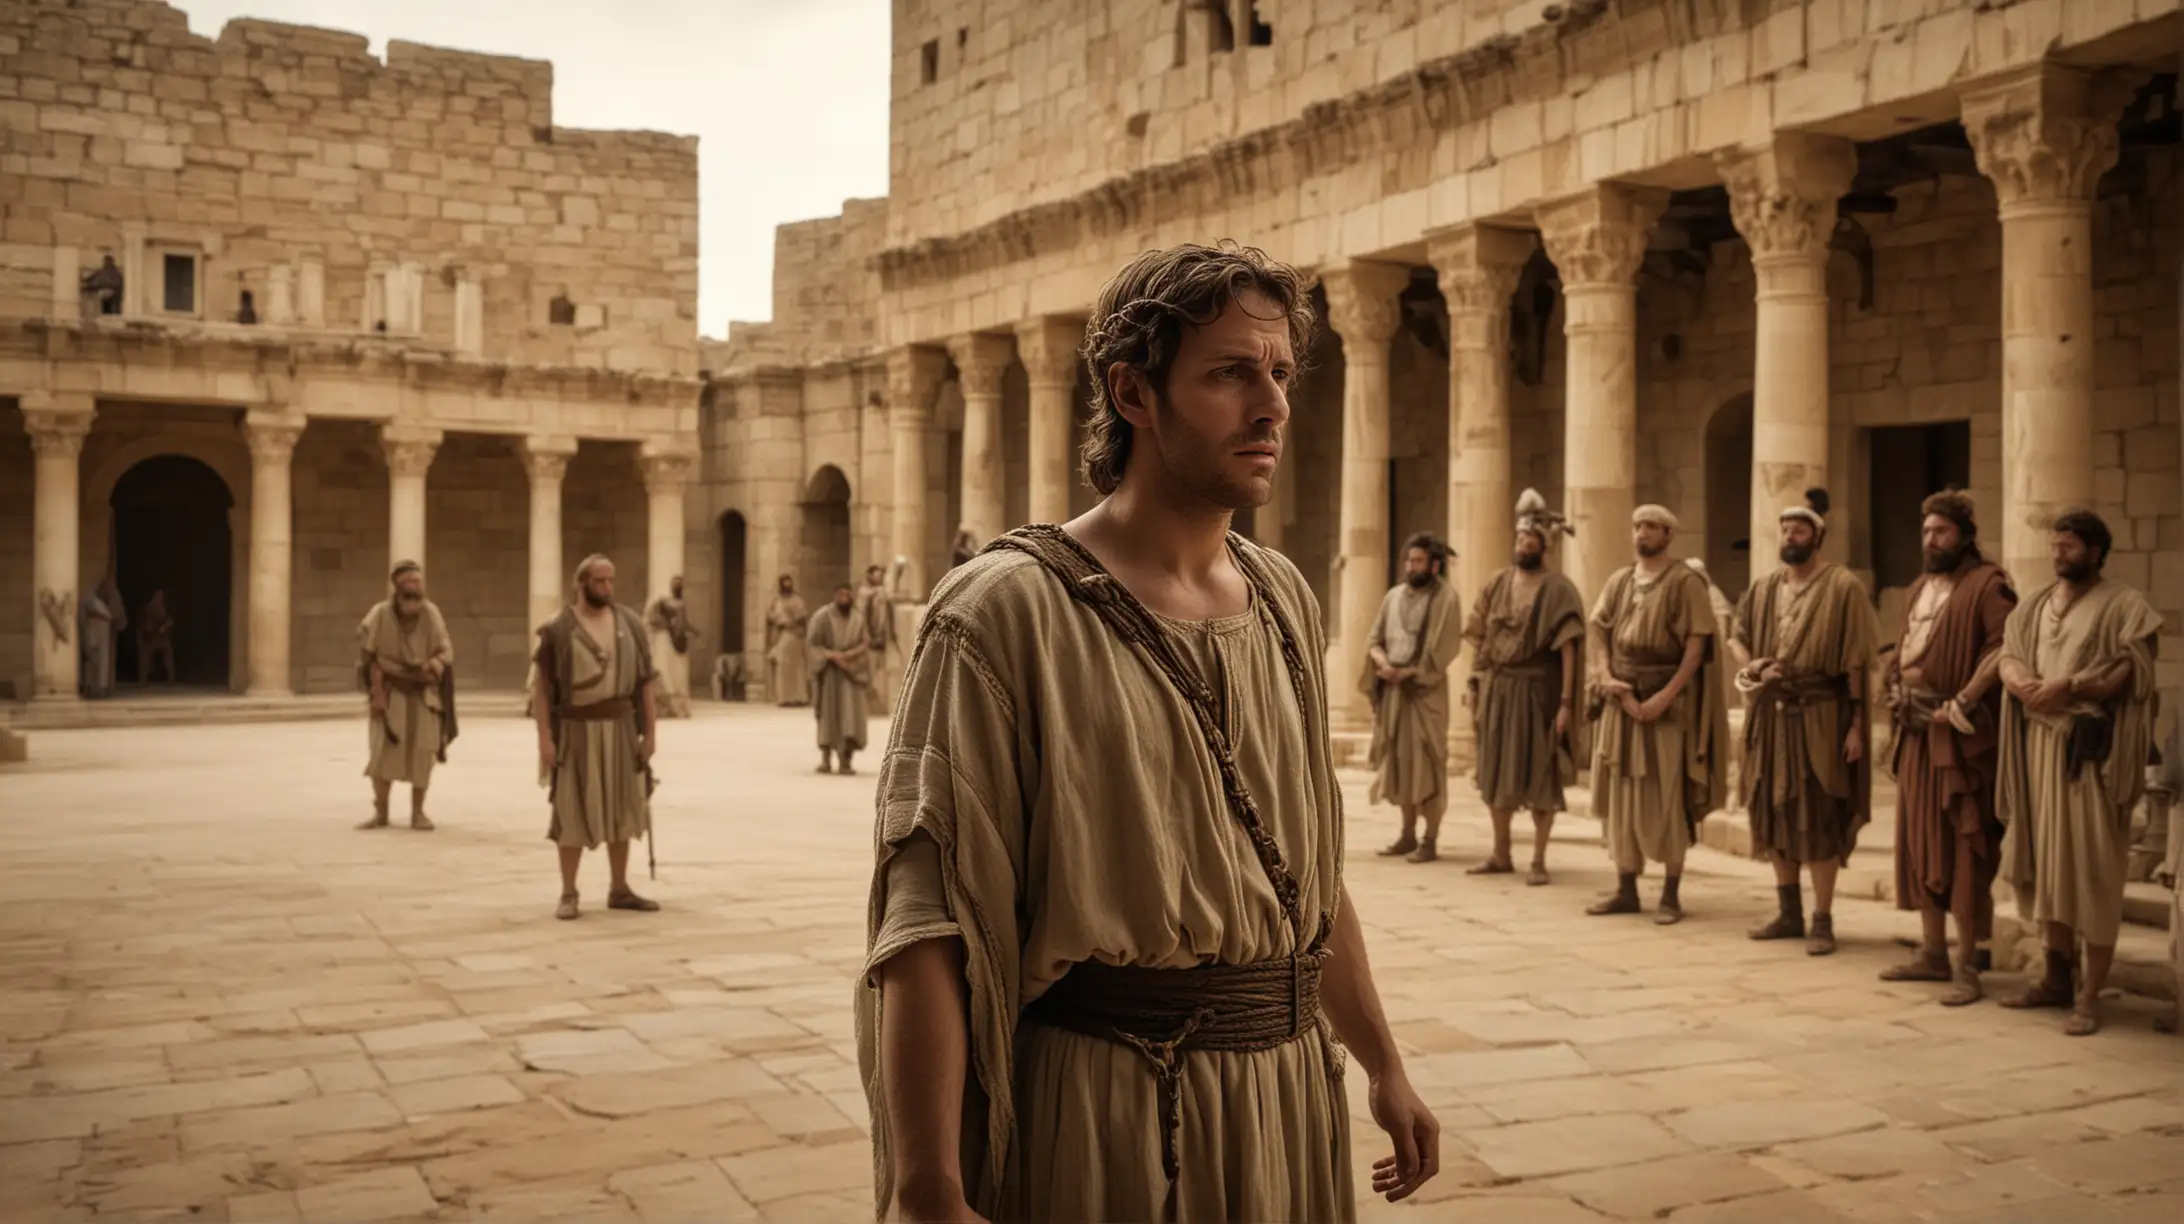 King David in his Desert Palace, looking sad, with a few other men in the background. Set during the Biblical era of King David.